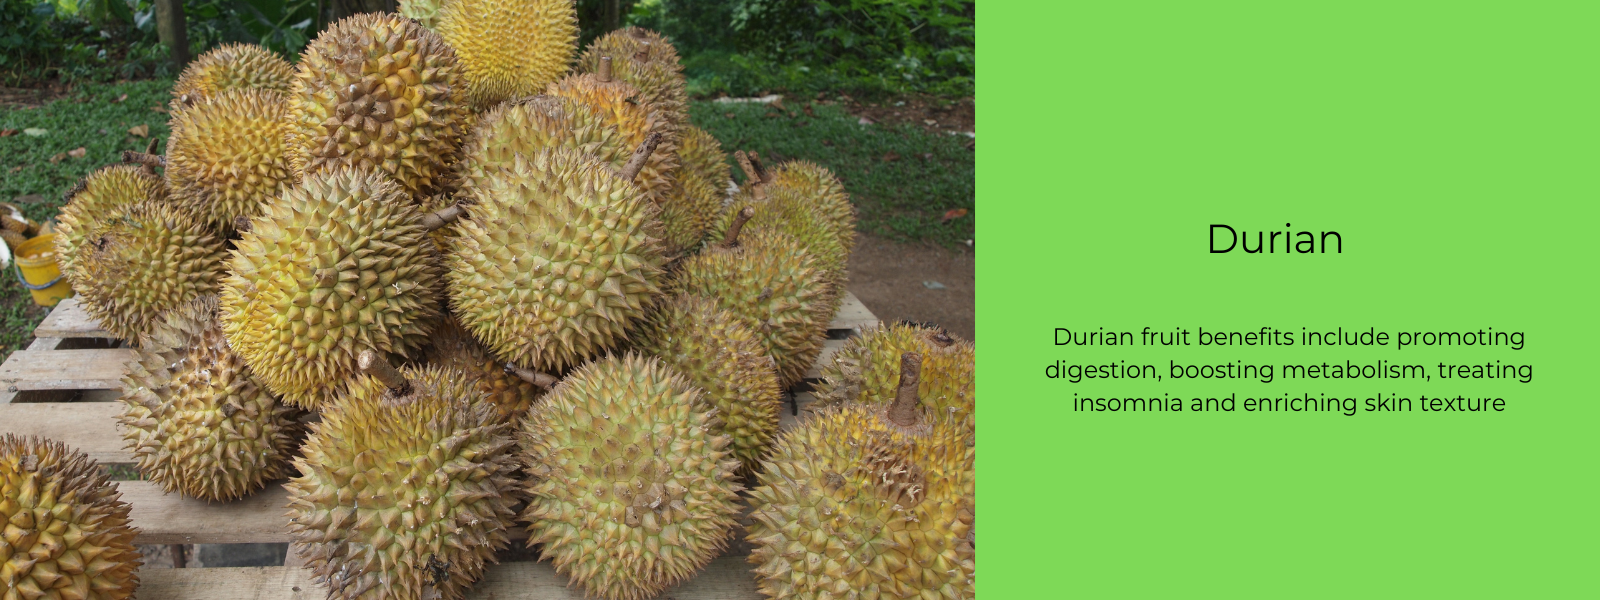 Durian - Health Benefits, Uses and Important Facts